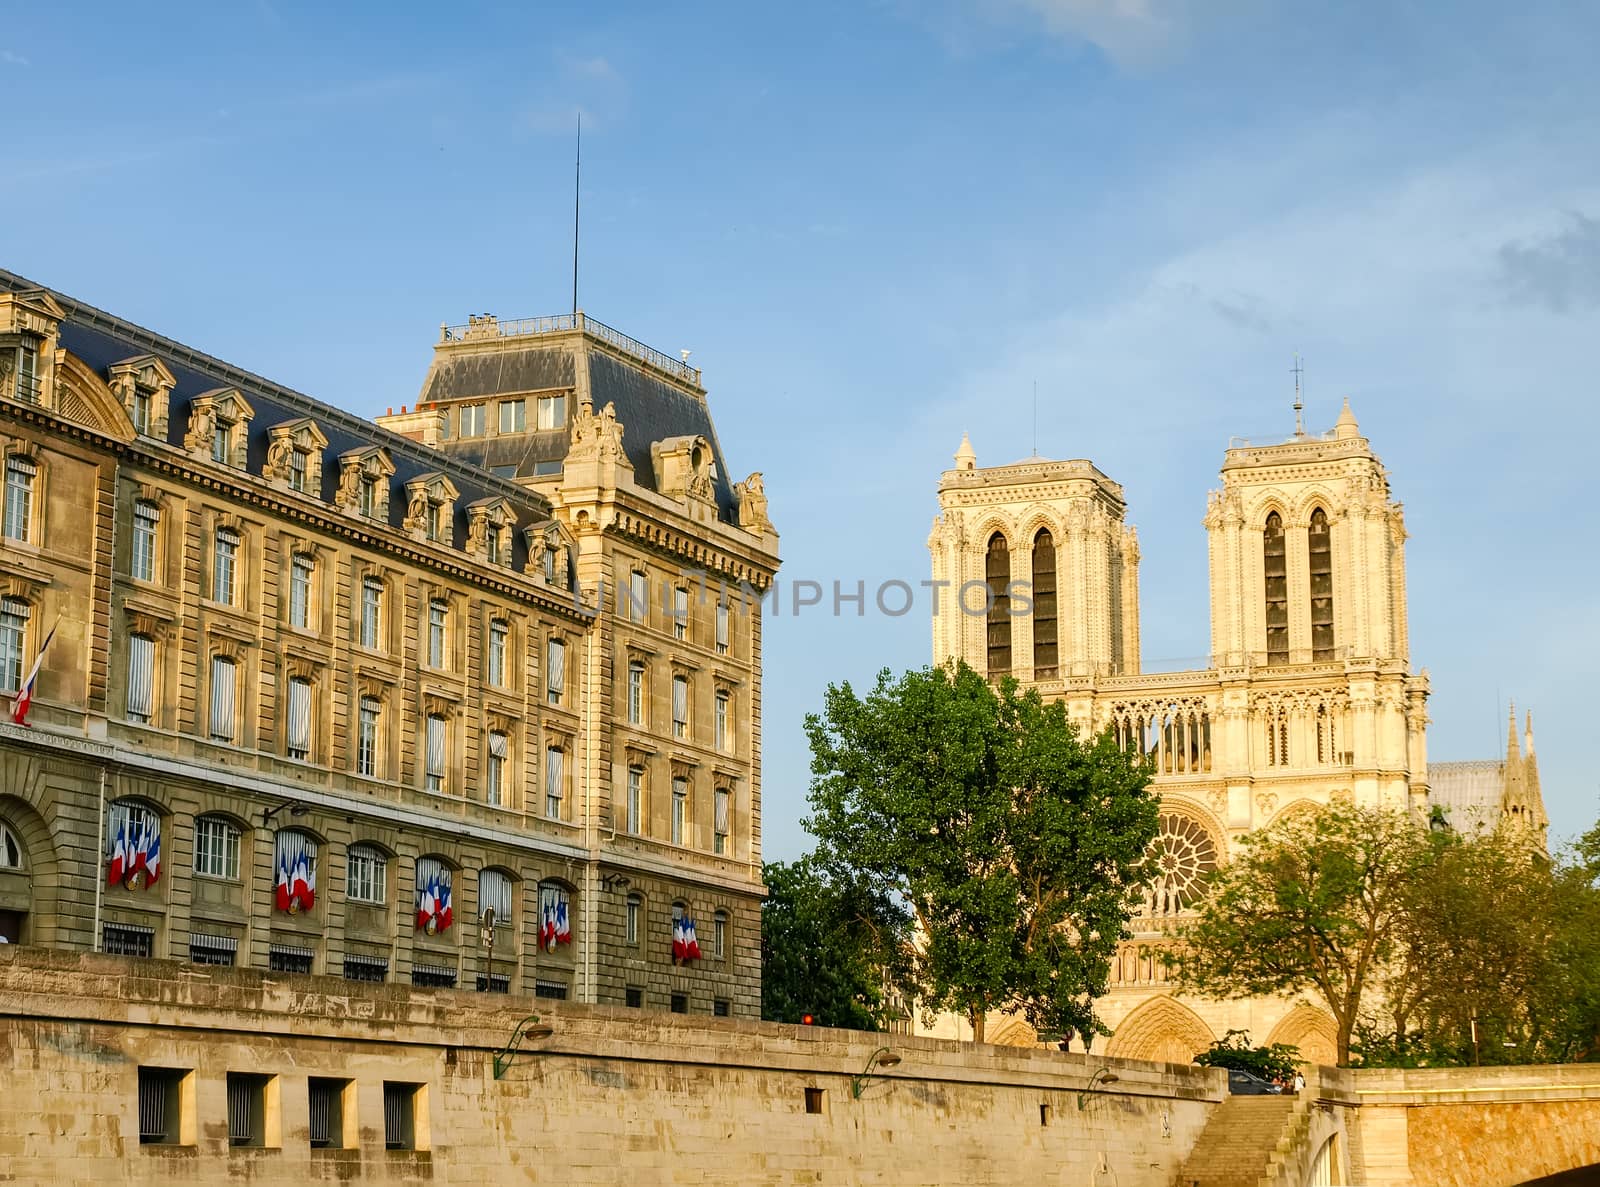 View of the west facade of the Cathedrale Notre-Dame de Paris and part of the building of Police prefecture from the Seine in the spring evening
